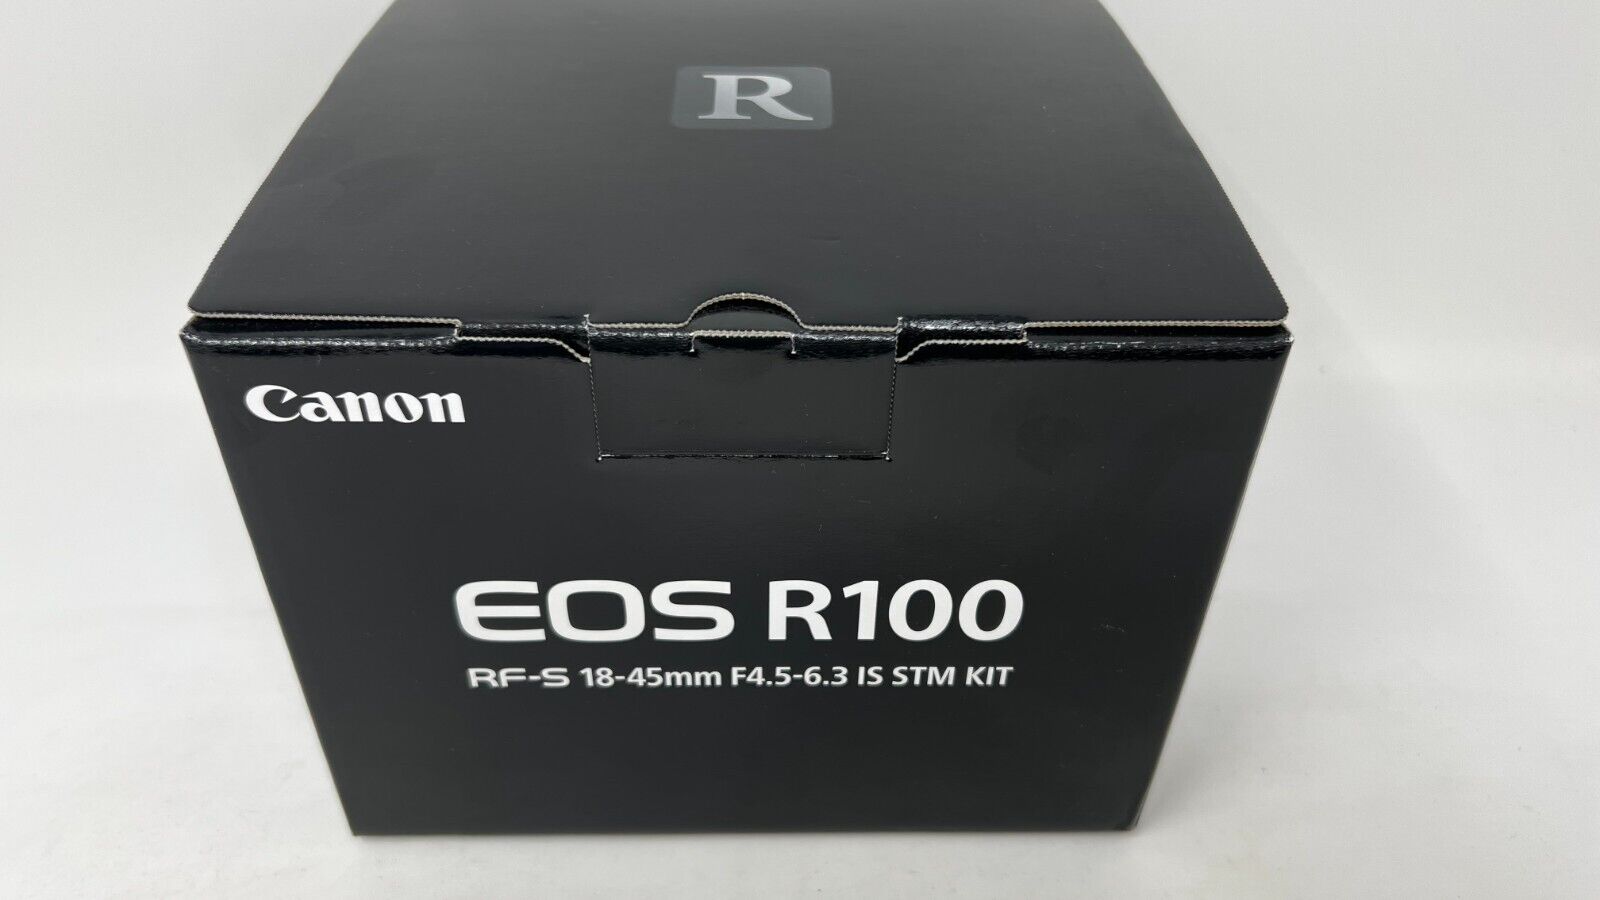 New Canon EOS R100 Mirrorless Camera With RF-S 18-45mm F/4.5-6.3 IS STM Lens Image 3